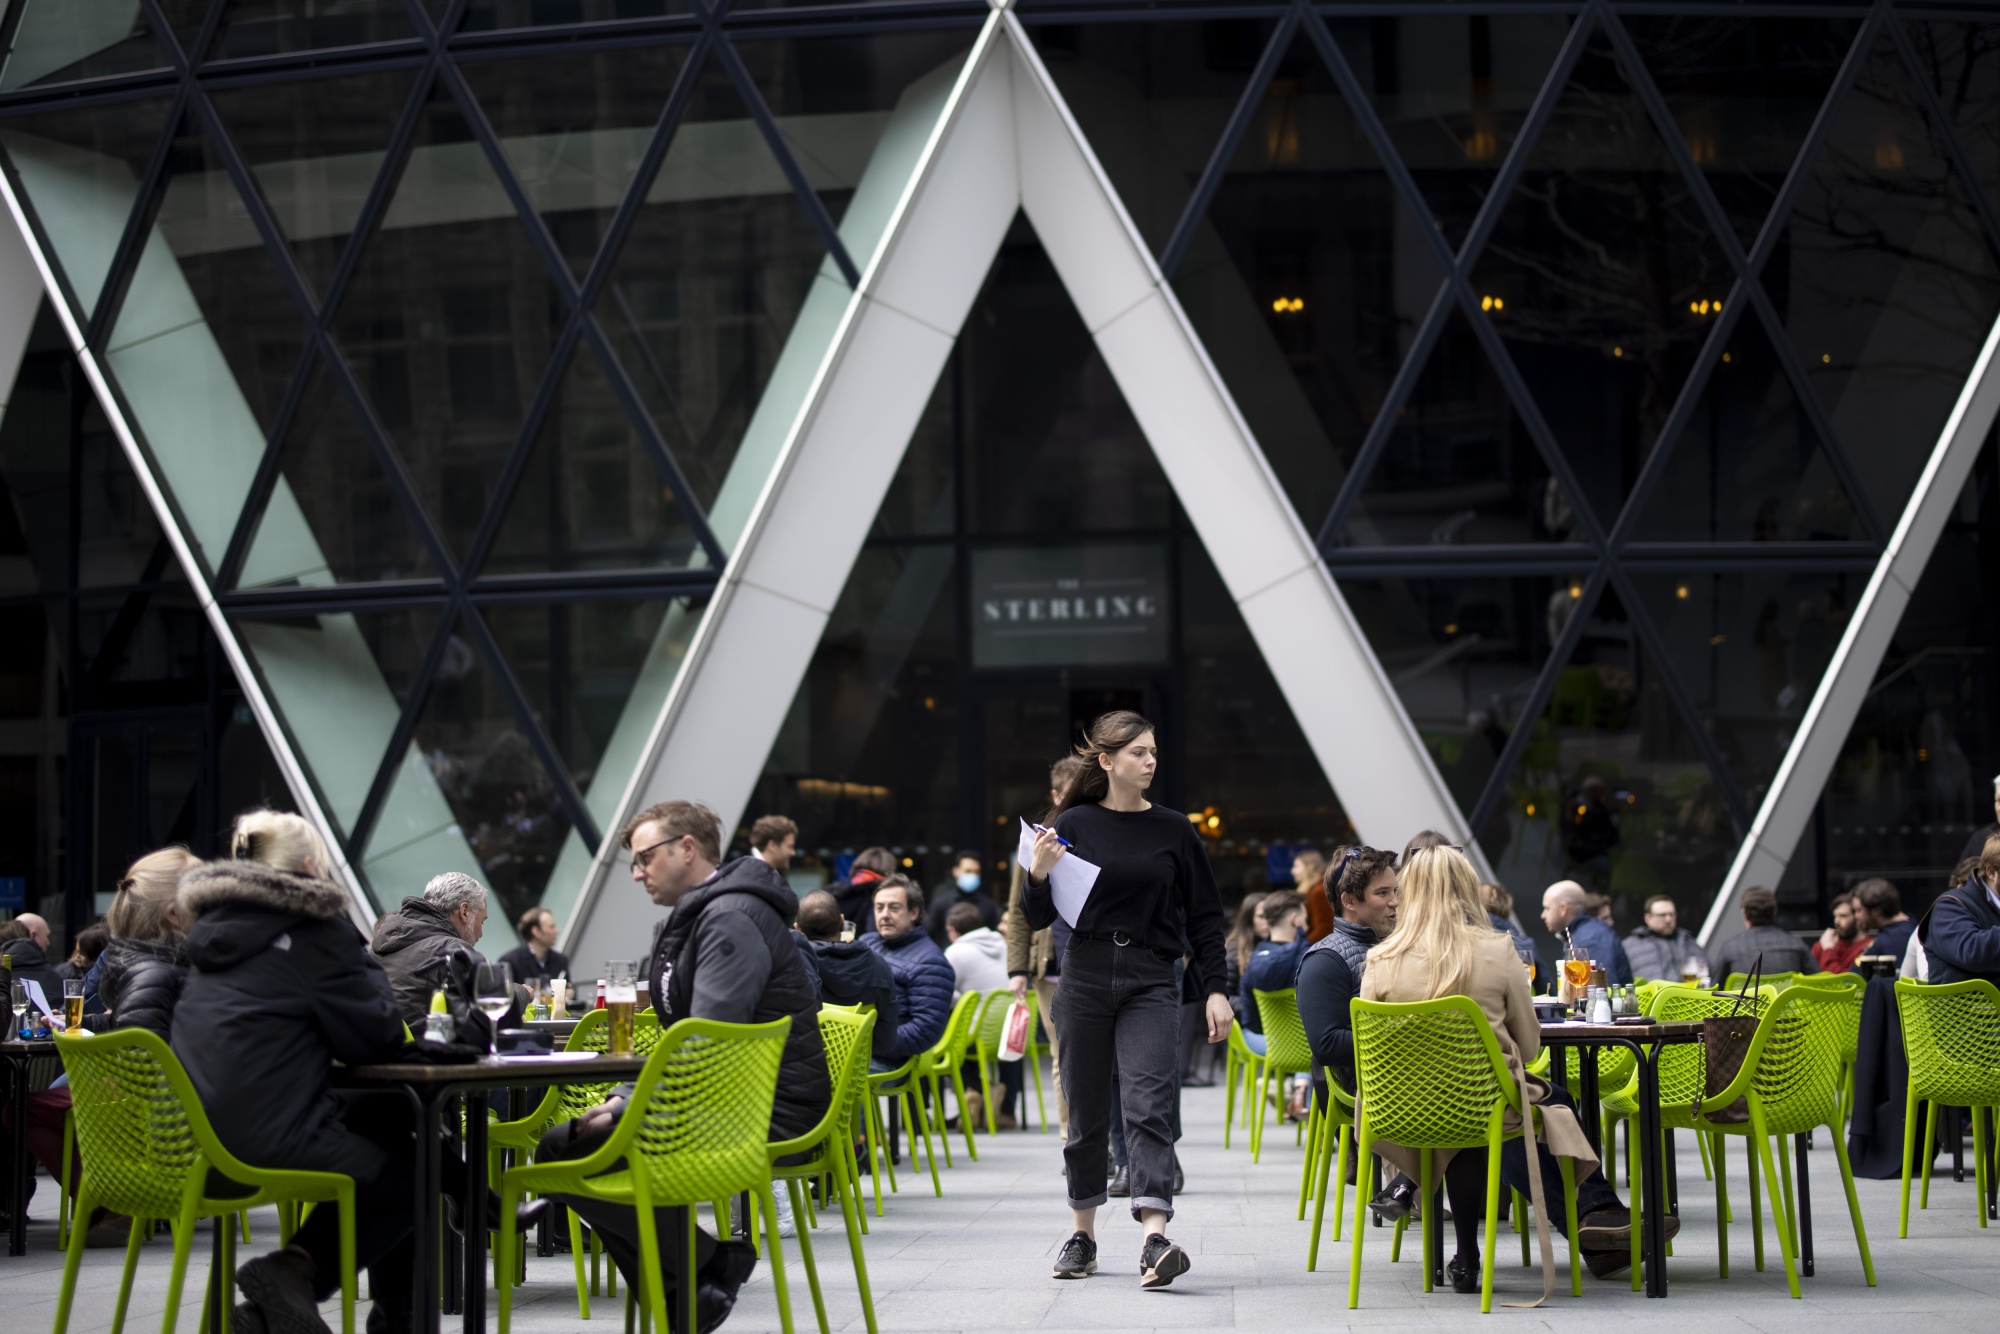 Outdoor diners in the financial district in London, U.K.